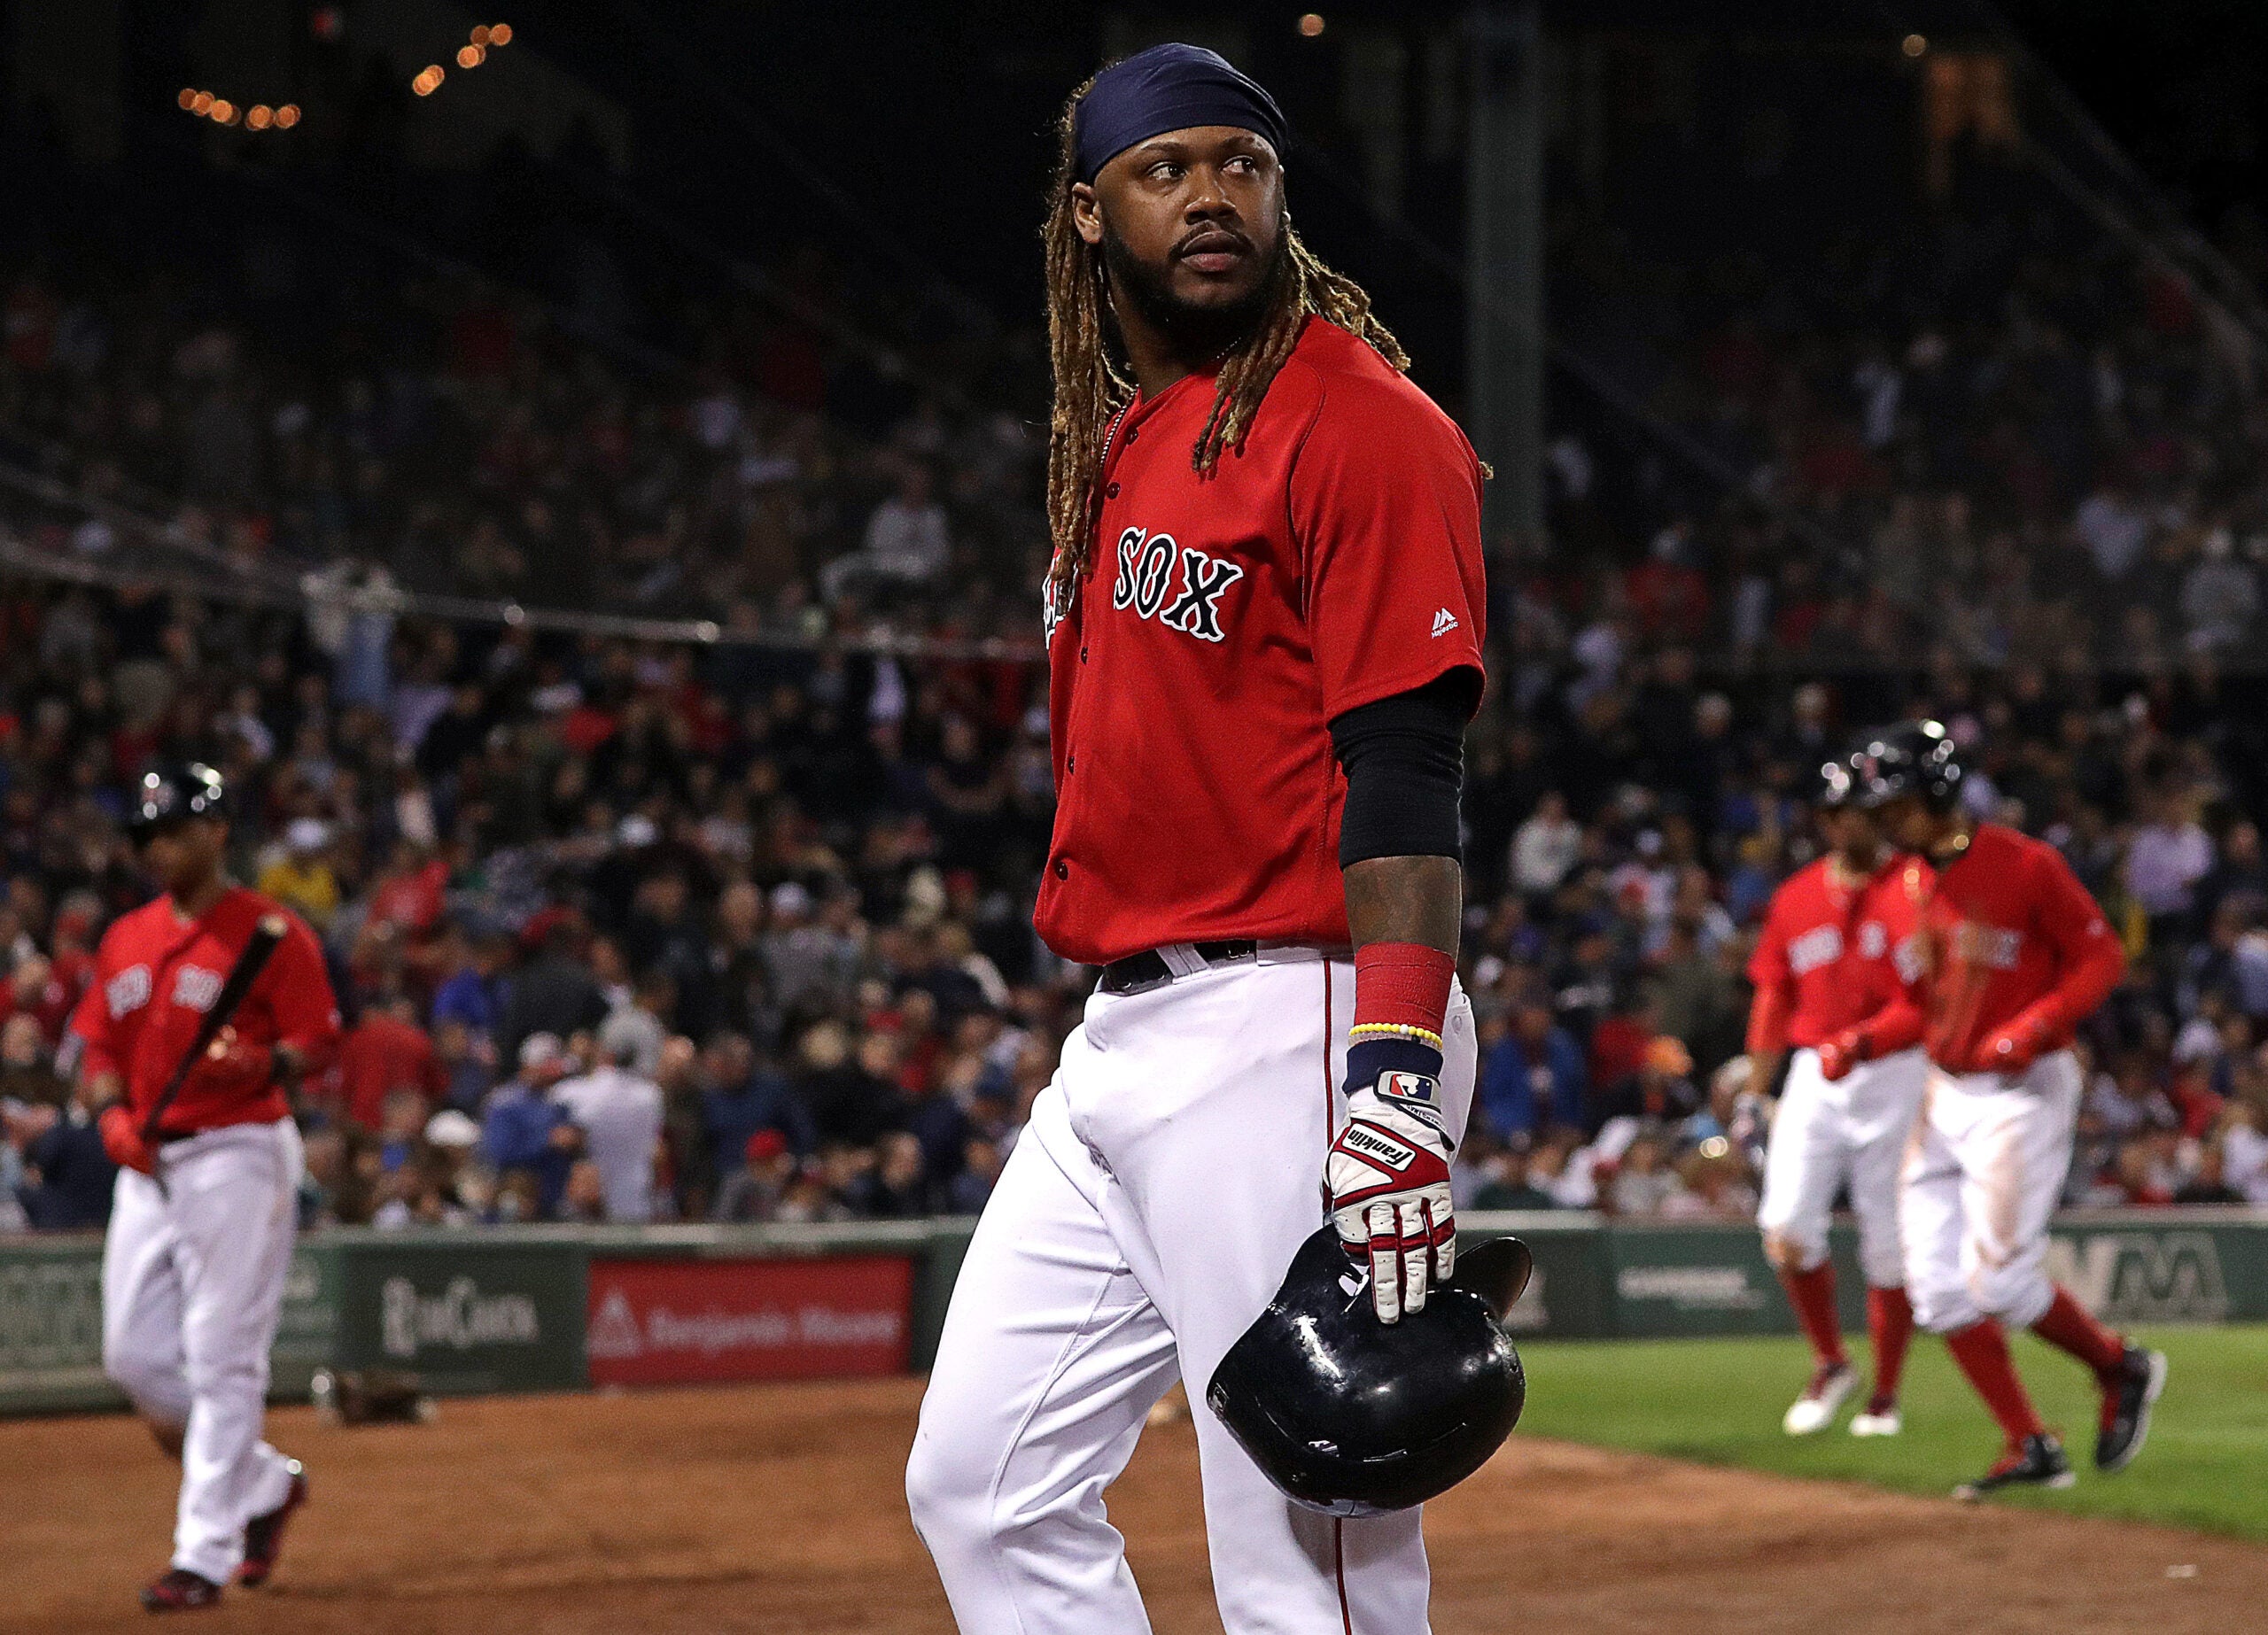 Hanley Ramirez to Red Sox: Latest Contract Details, Comments